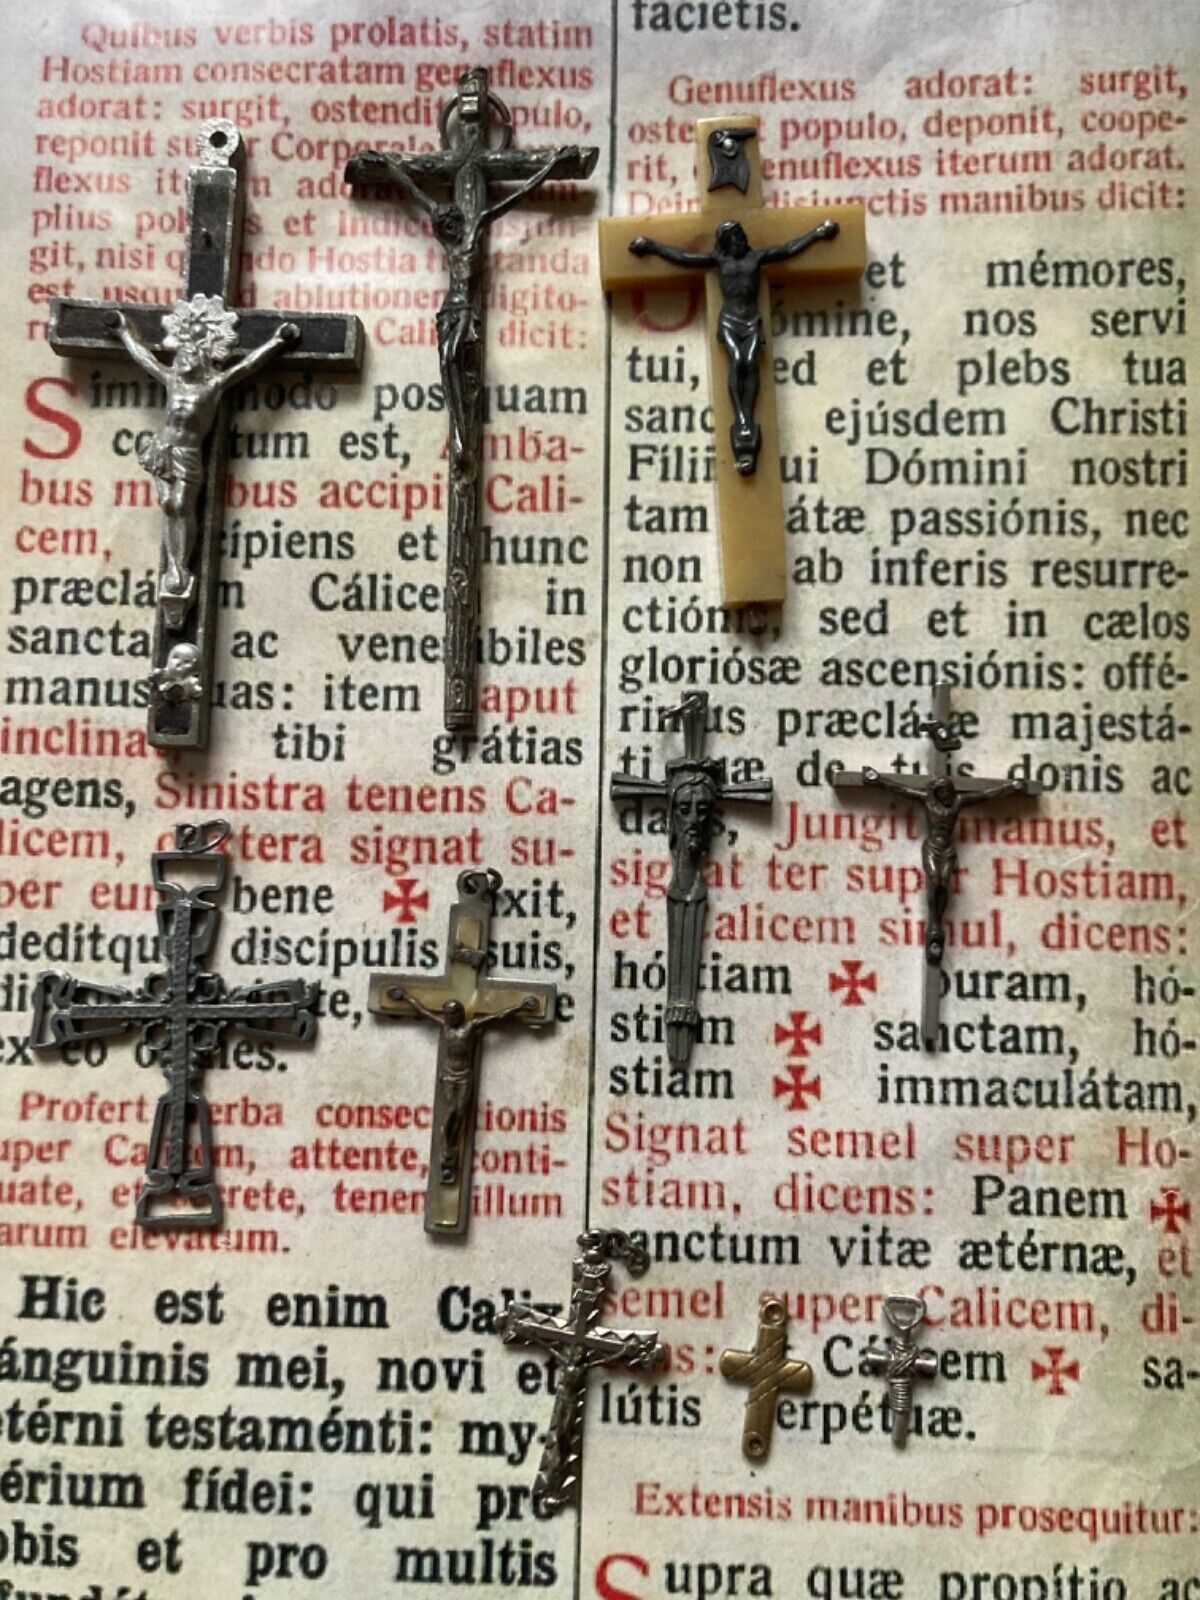 RARE LOT CRUCIFIXES : N. 10 TOTAL - Stunning - Good Deal - 1930-1950 - SPECIAL 